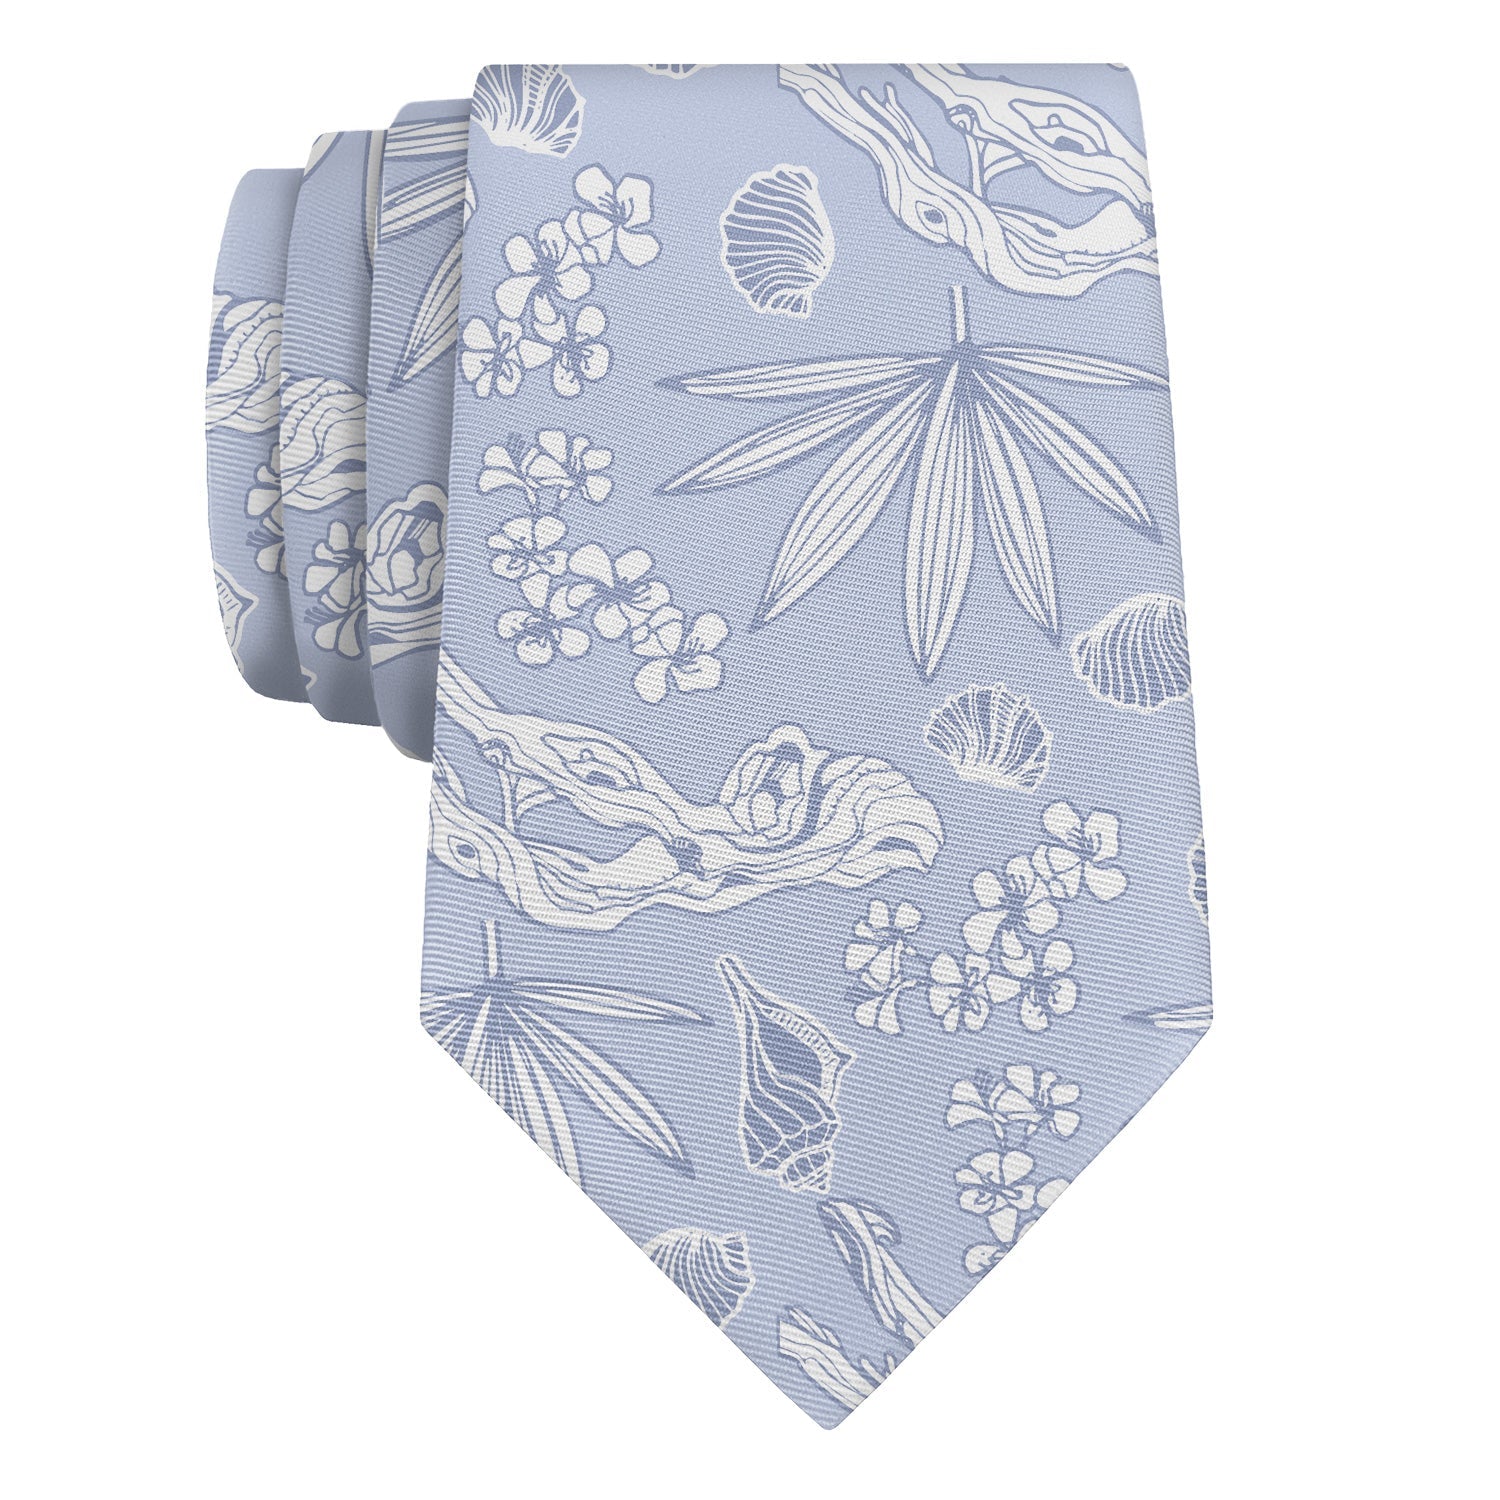 Driftwood Floral Necktie - Rolled - Knotty Tie Co.